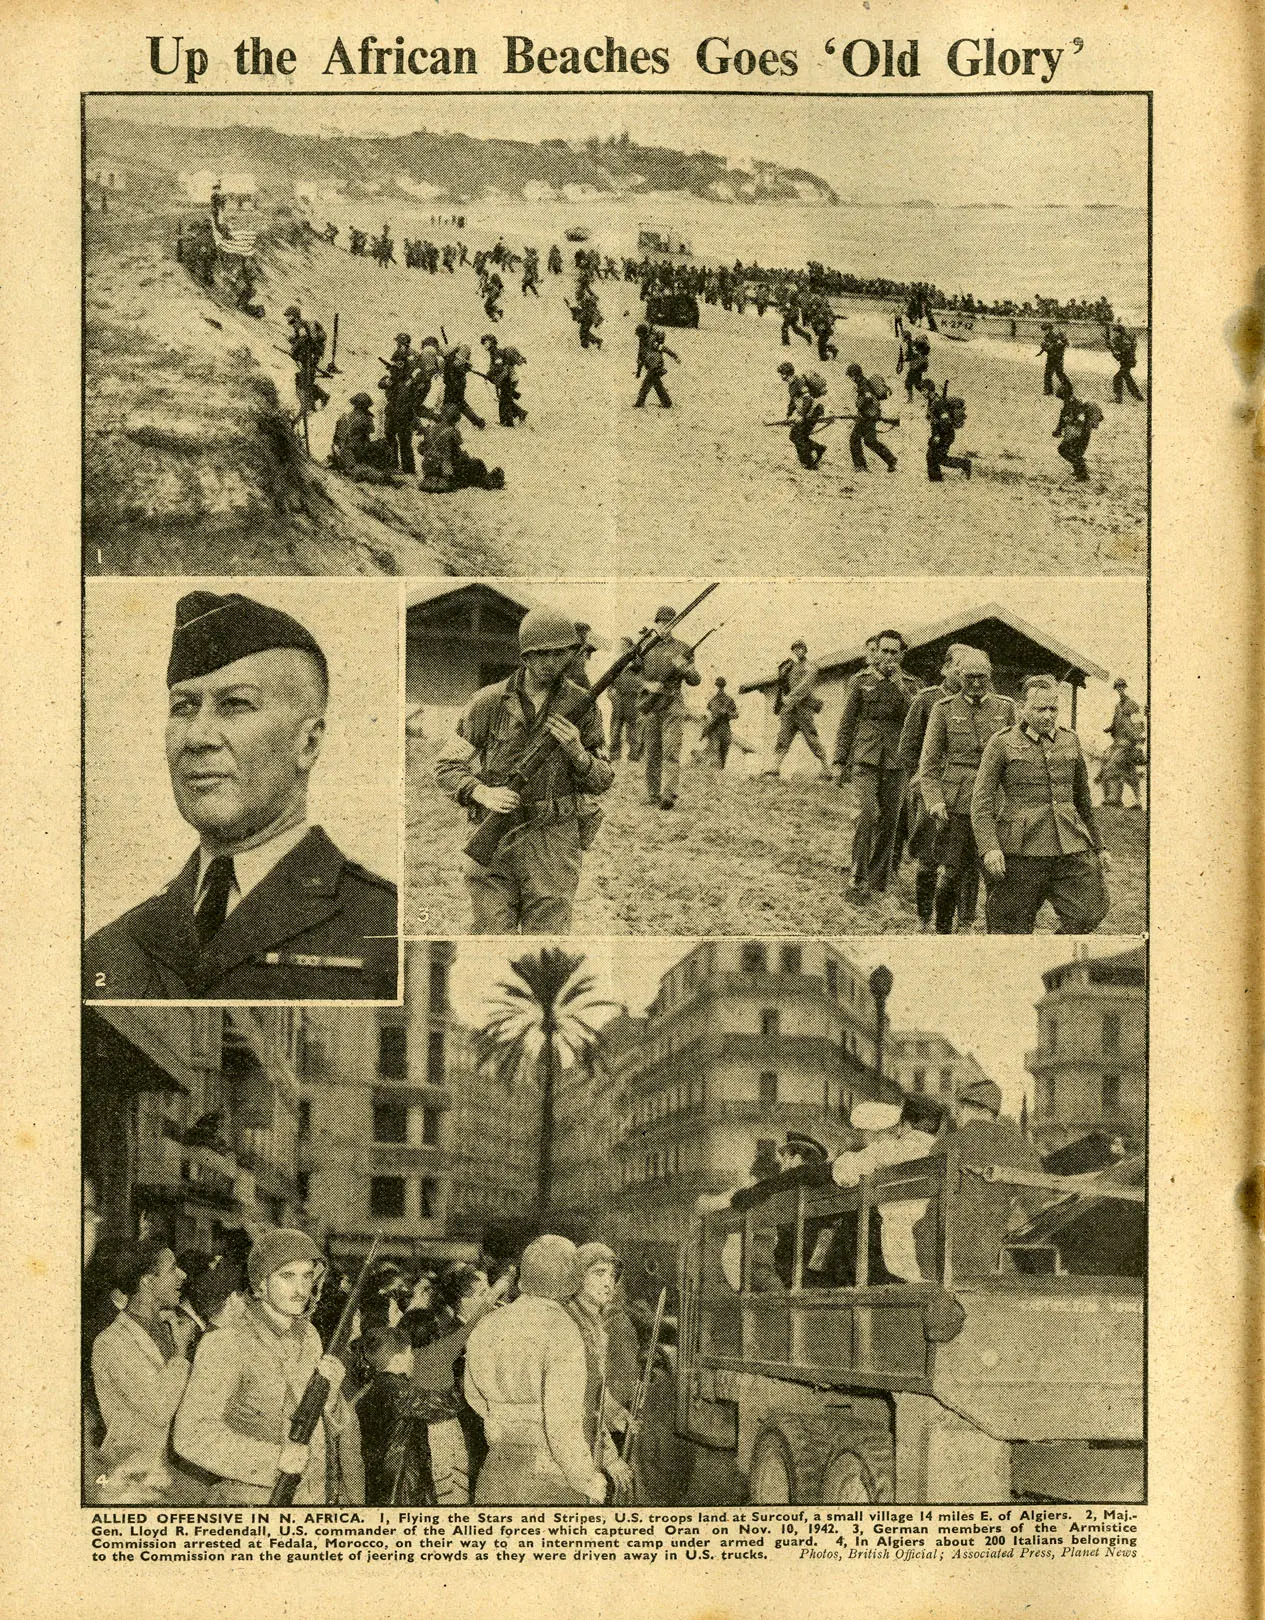 A page of The War Illustrated showing several photos of American soldiers in North Africa. The top picture shows a force of a couple hundred men landing on a beach and moving inland. In the center is a photo of an American general and another of American soldiers escorting captured prisoners of war. The last photo shows American soldiers riding on foot and in a large truck riding into a busy city center.